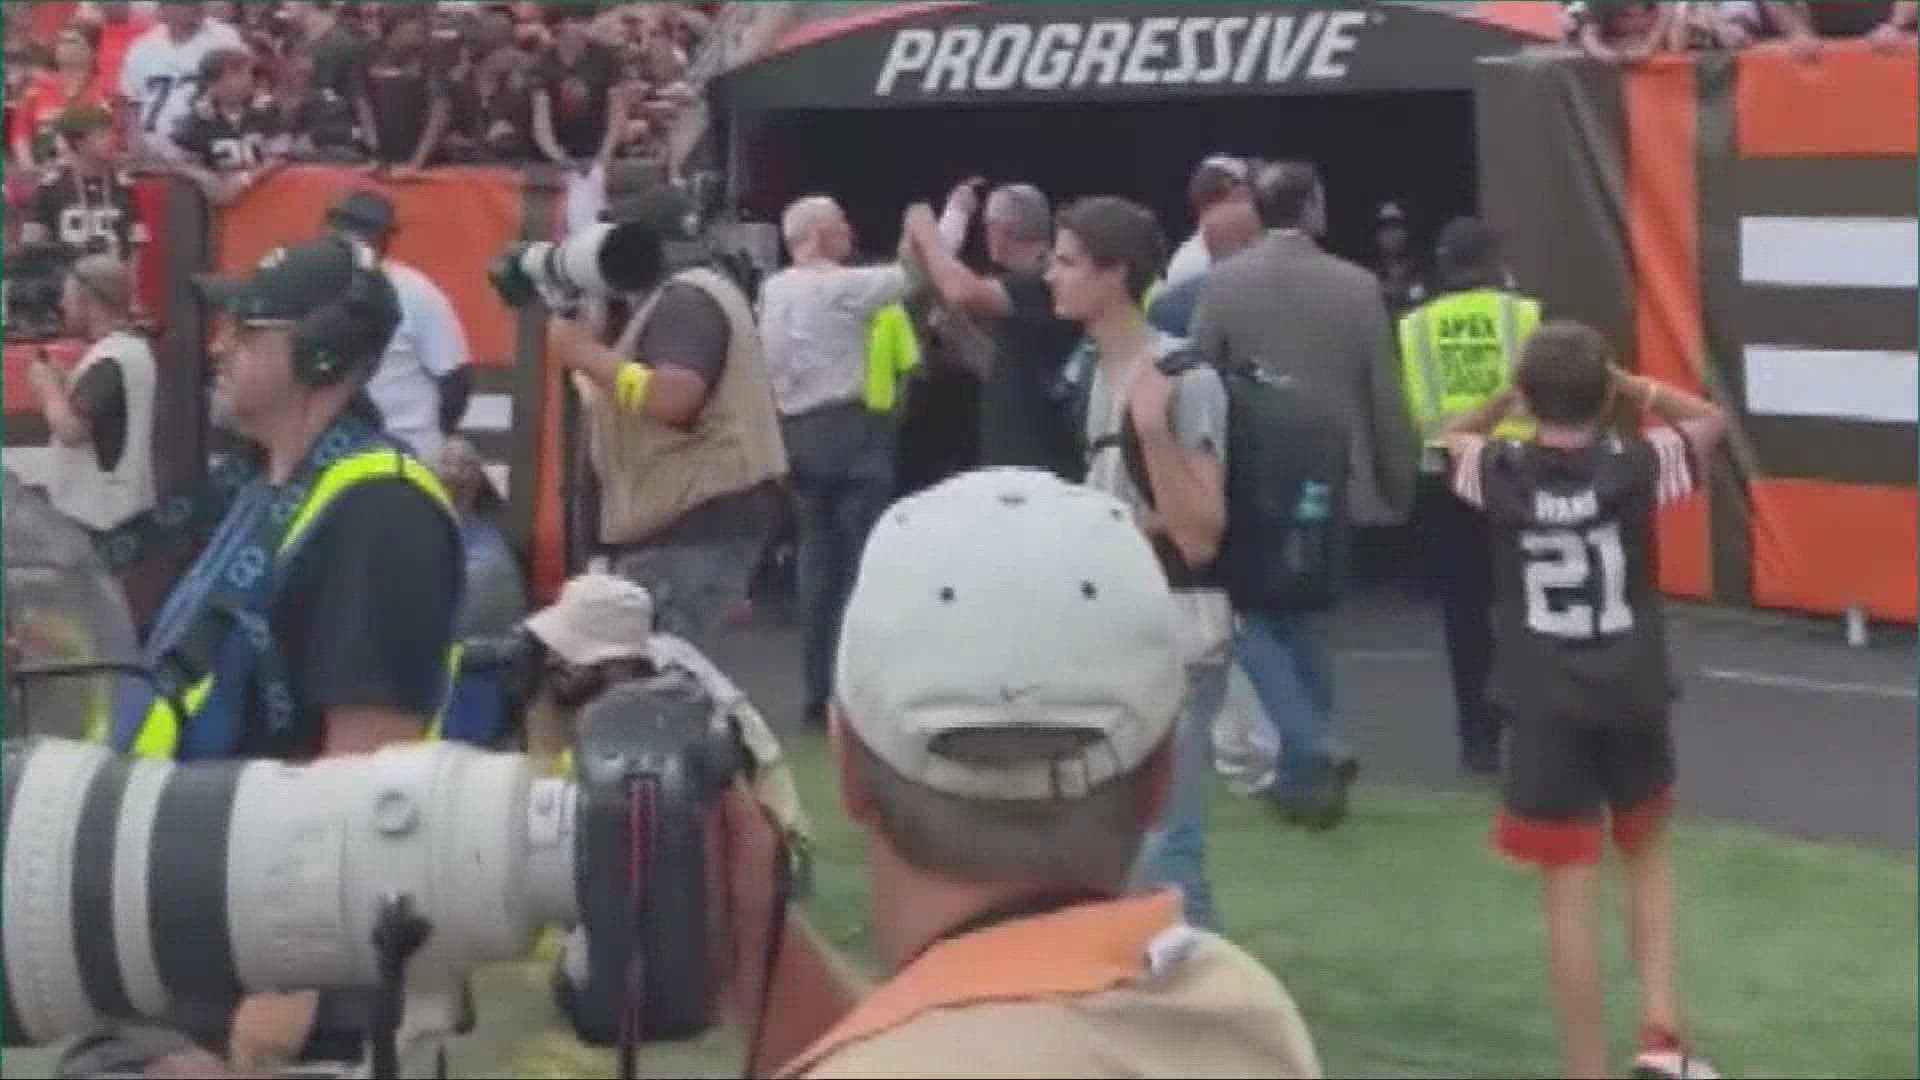 A Cleveland Browns fan has been banned from the stadium and arrested after throwing a bottle at owner Jimmy Haslam.